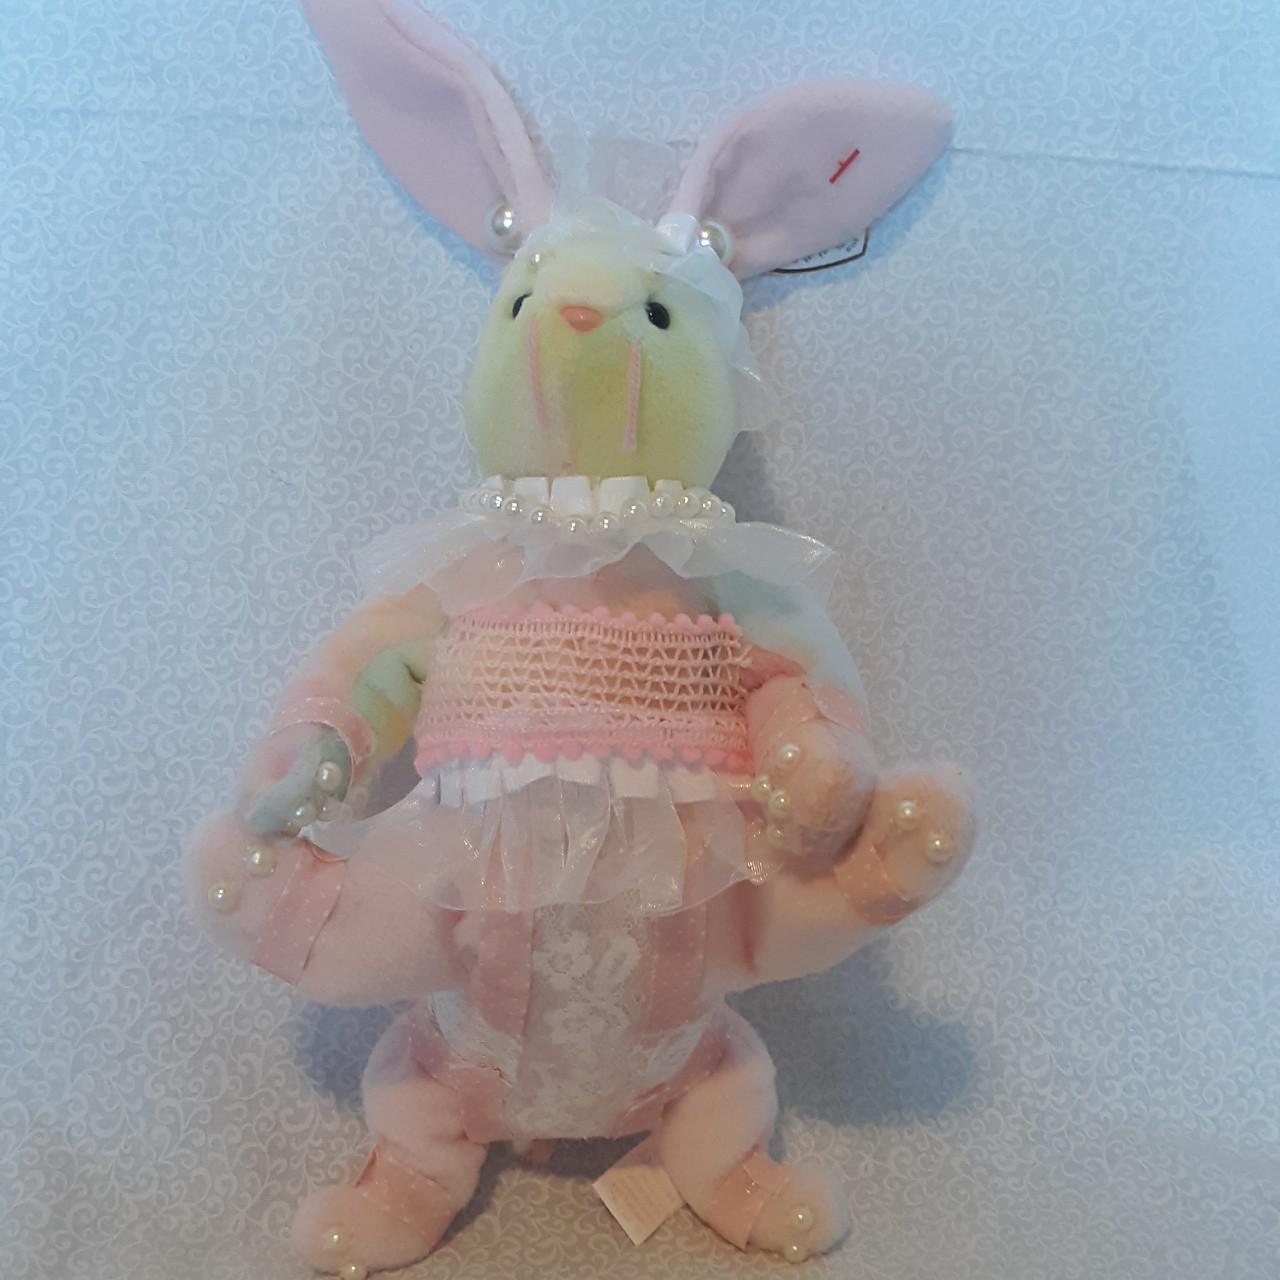 Product Image 1 - Pinky patty!!
RESERVED!!!

Pinky Patty is attending